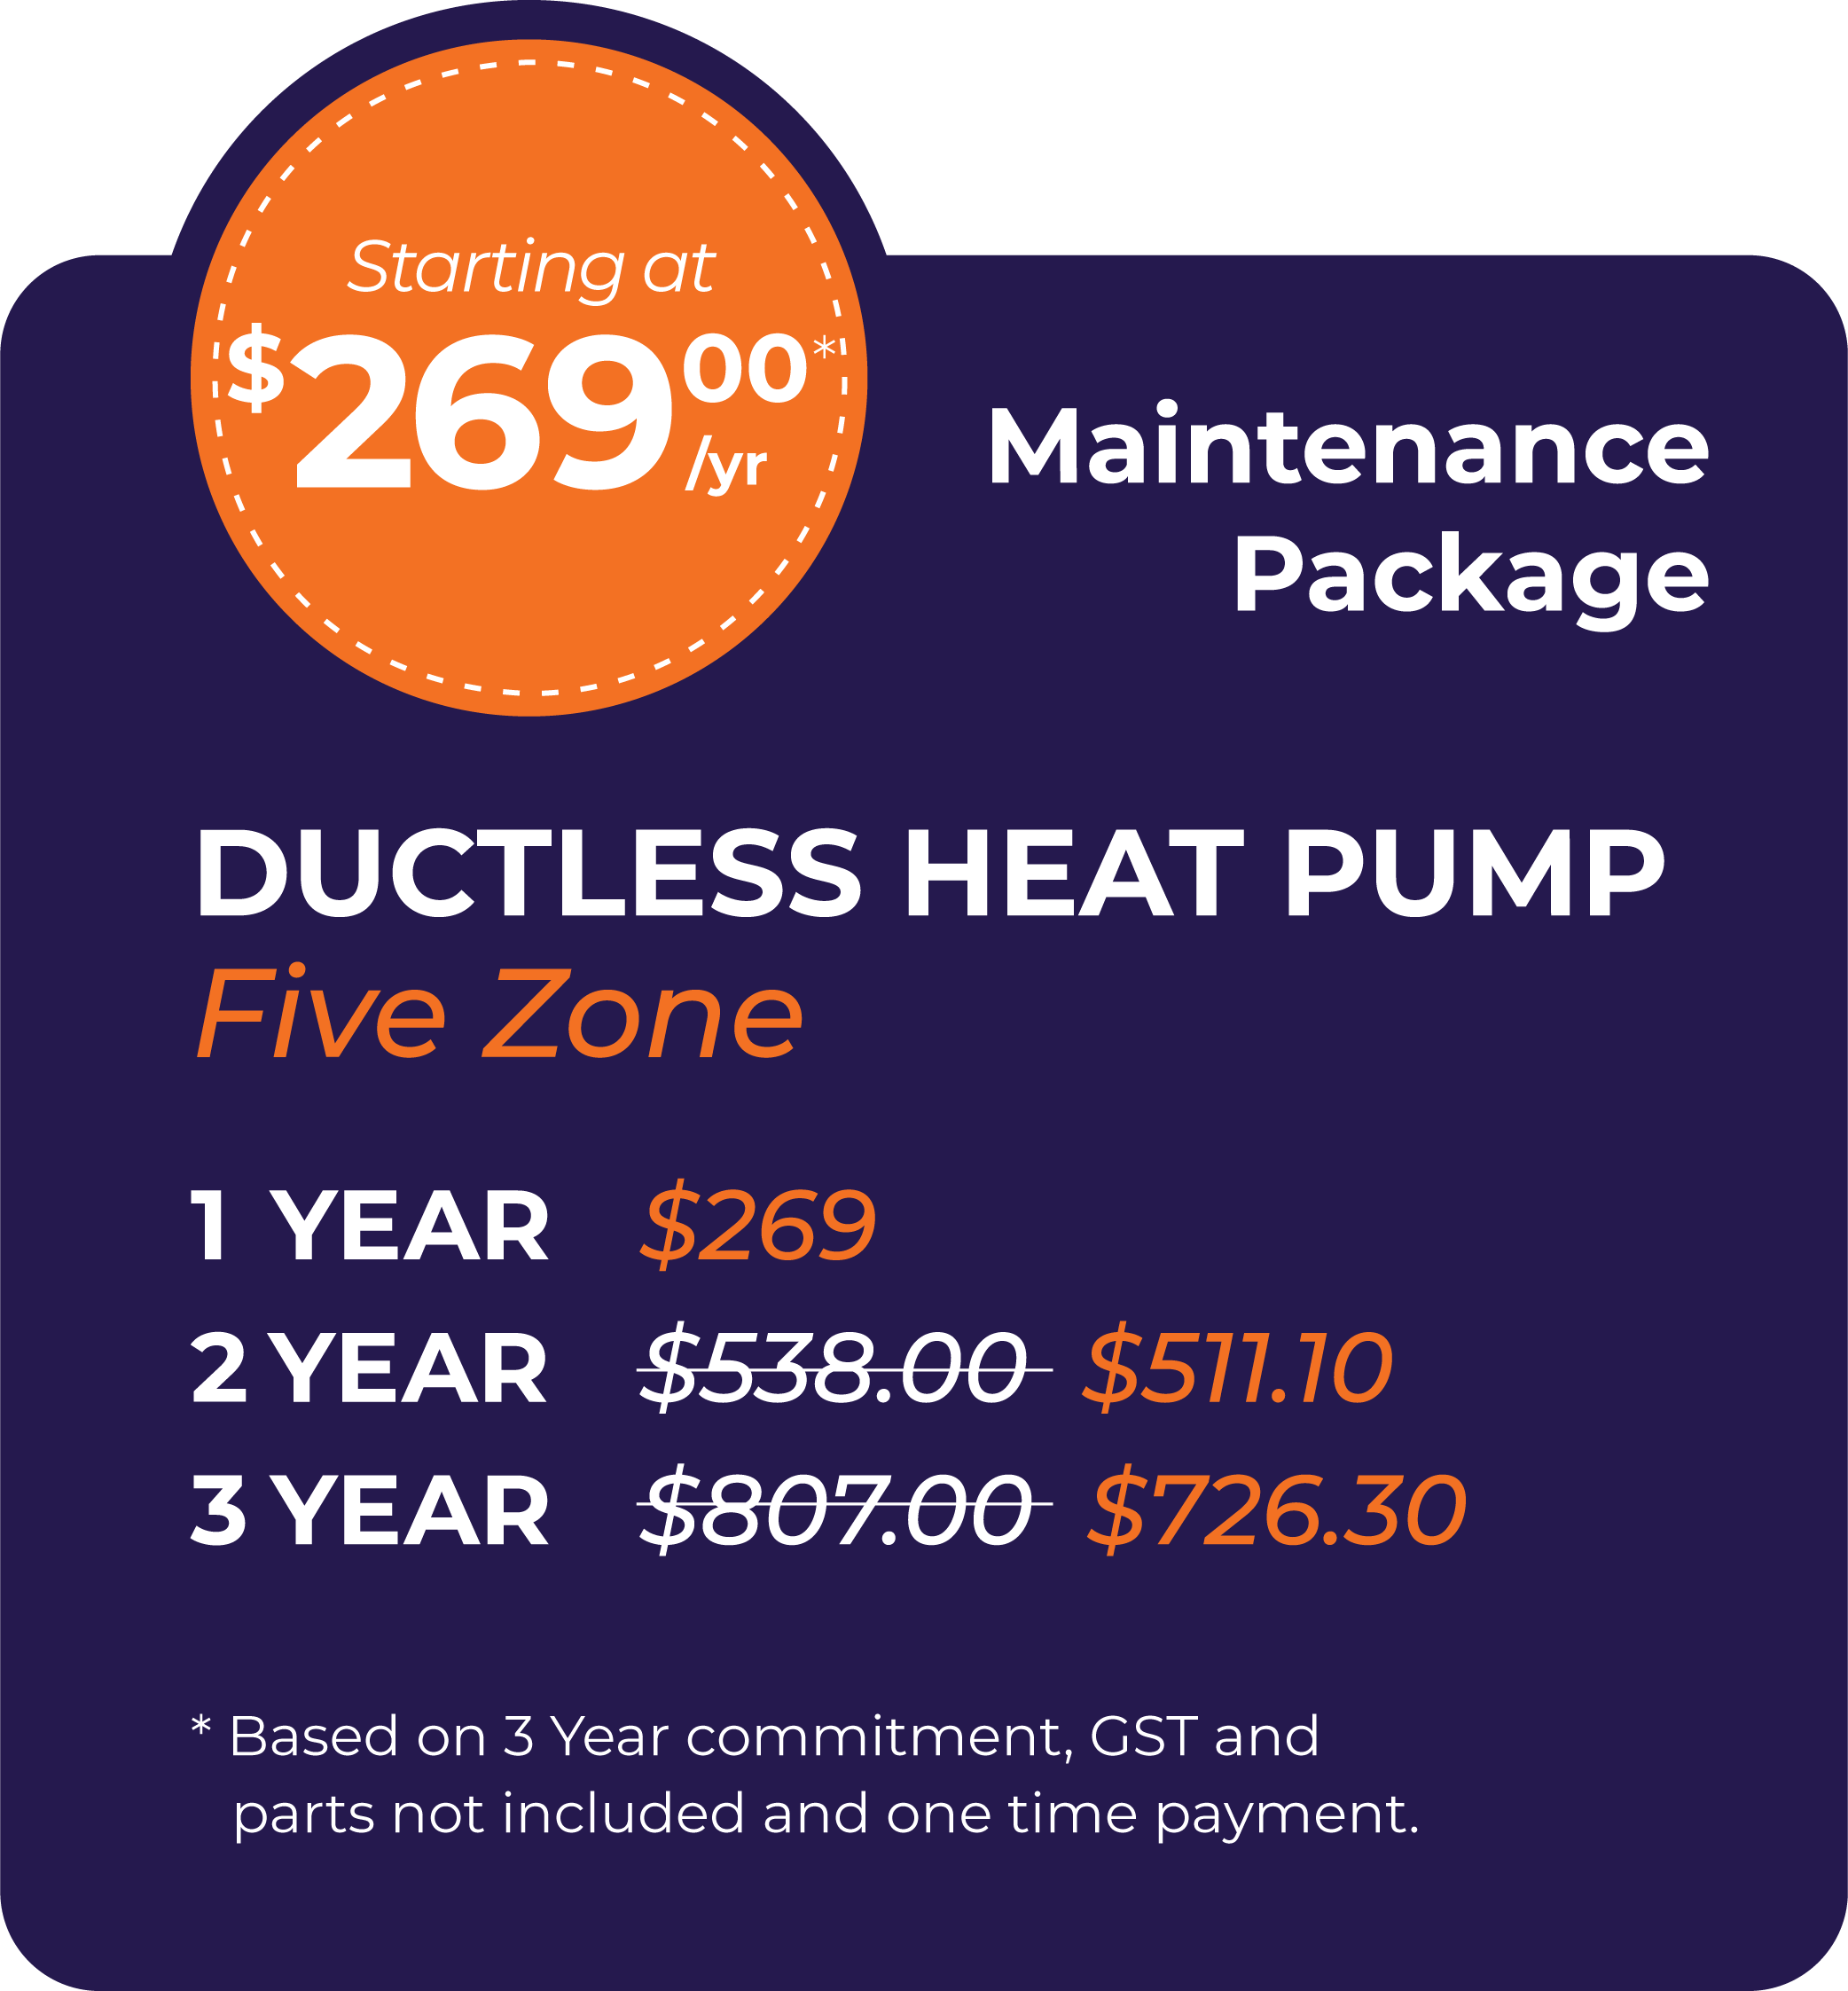 Ductless Heat Pump Five Zone Packages